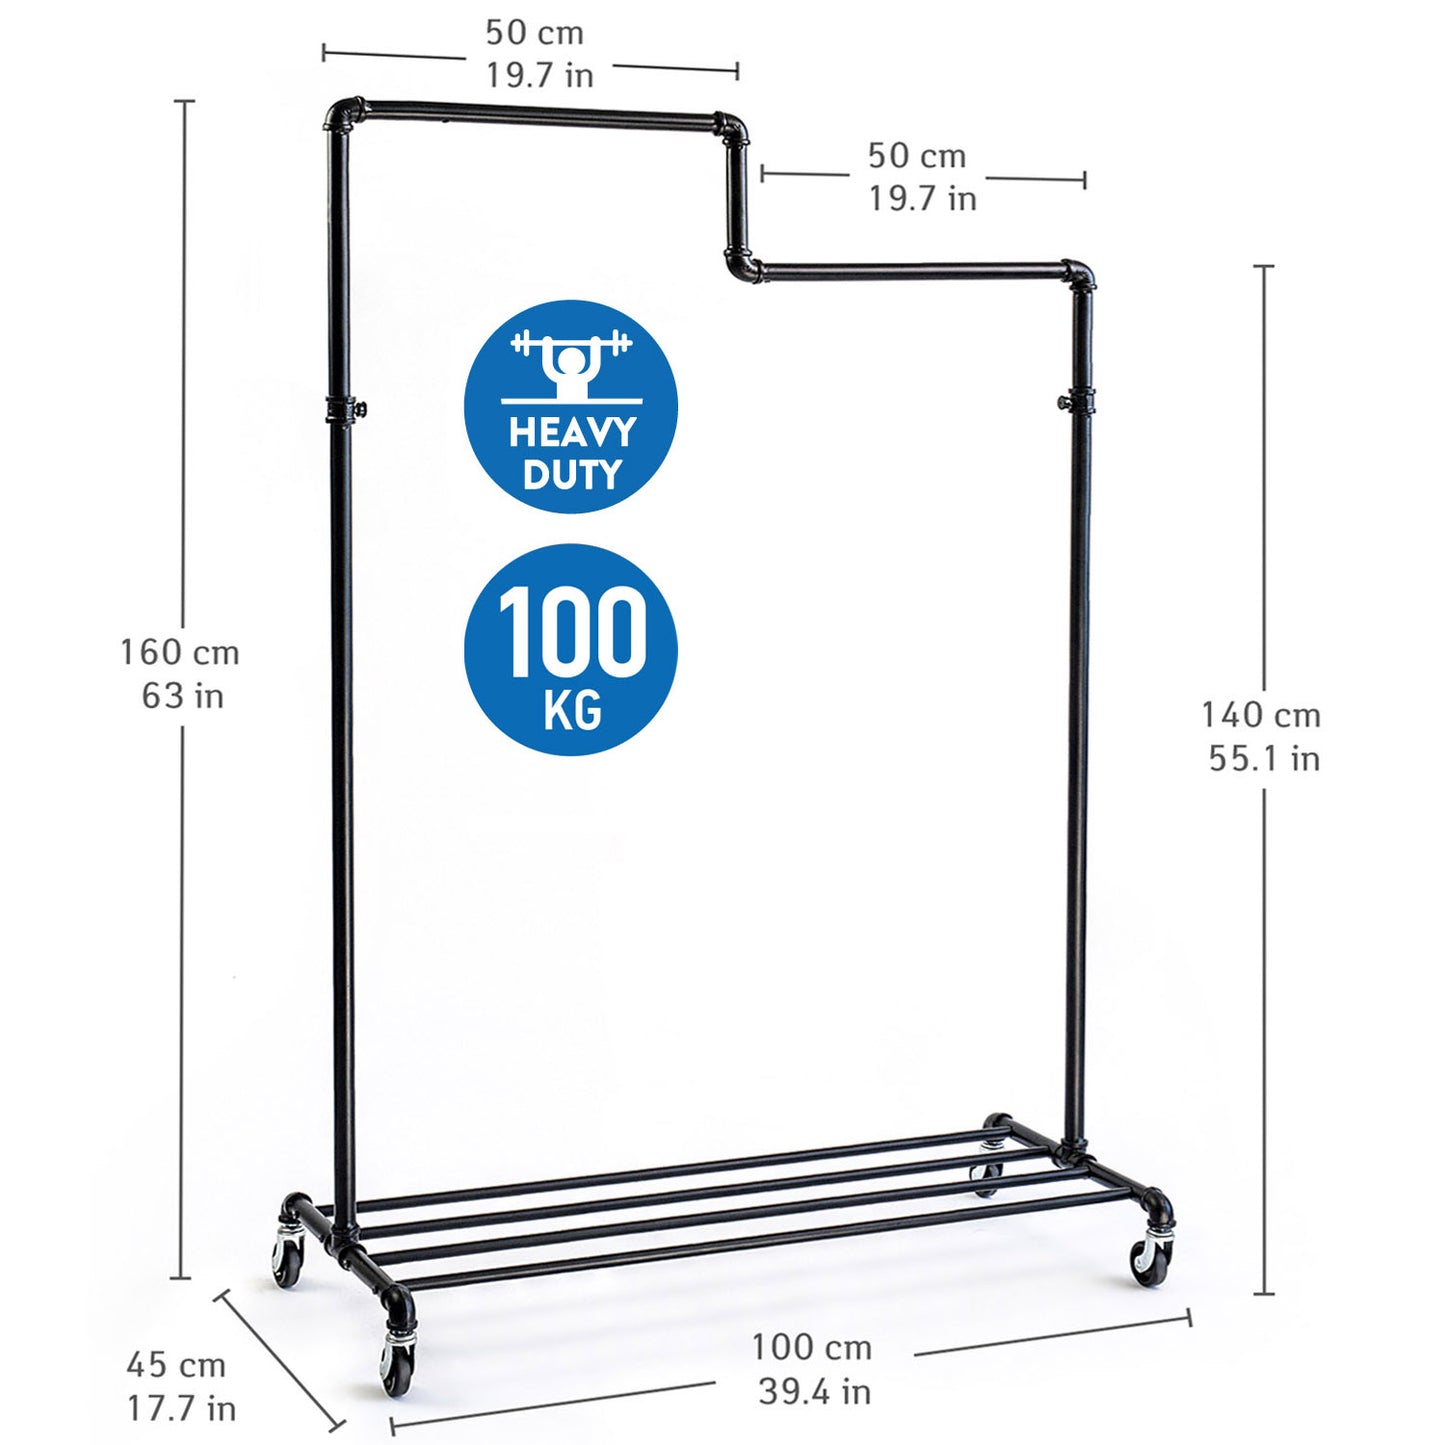 Clothes Rail Stable in Industrial Design, Heavy Duty Garment Rail with Shoe Rack, 100kg, Tatkraft Tube, 4